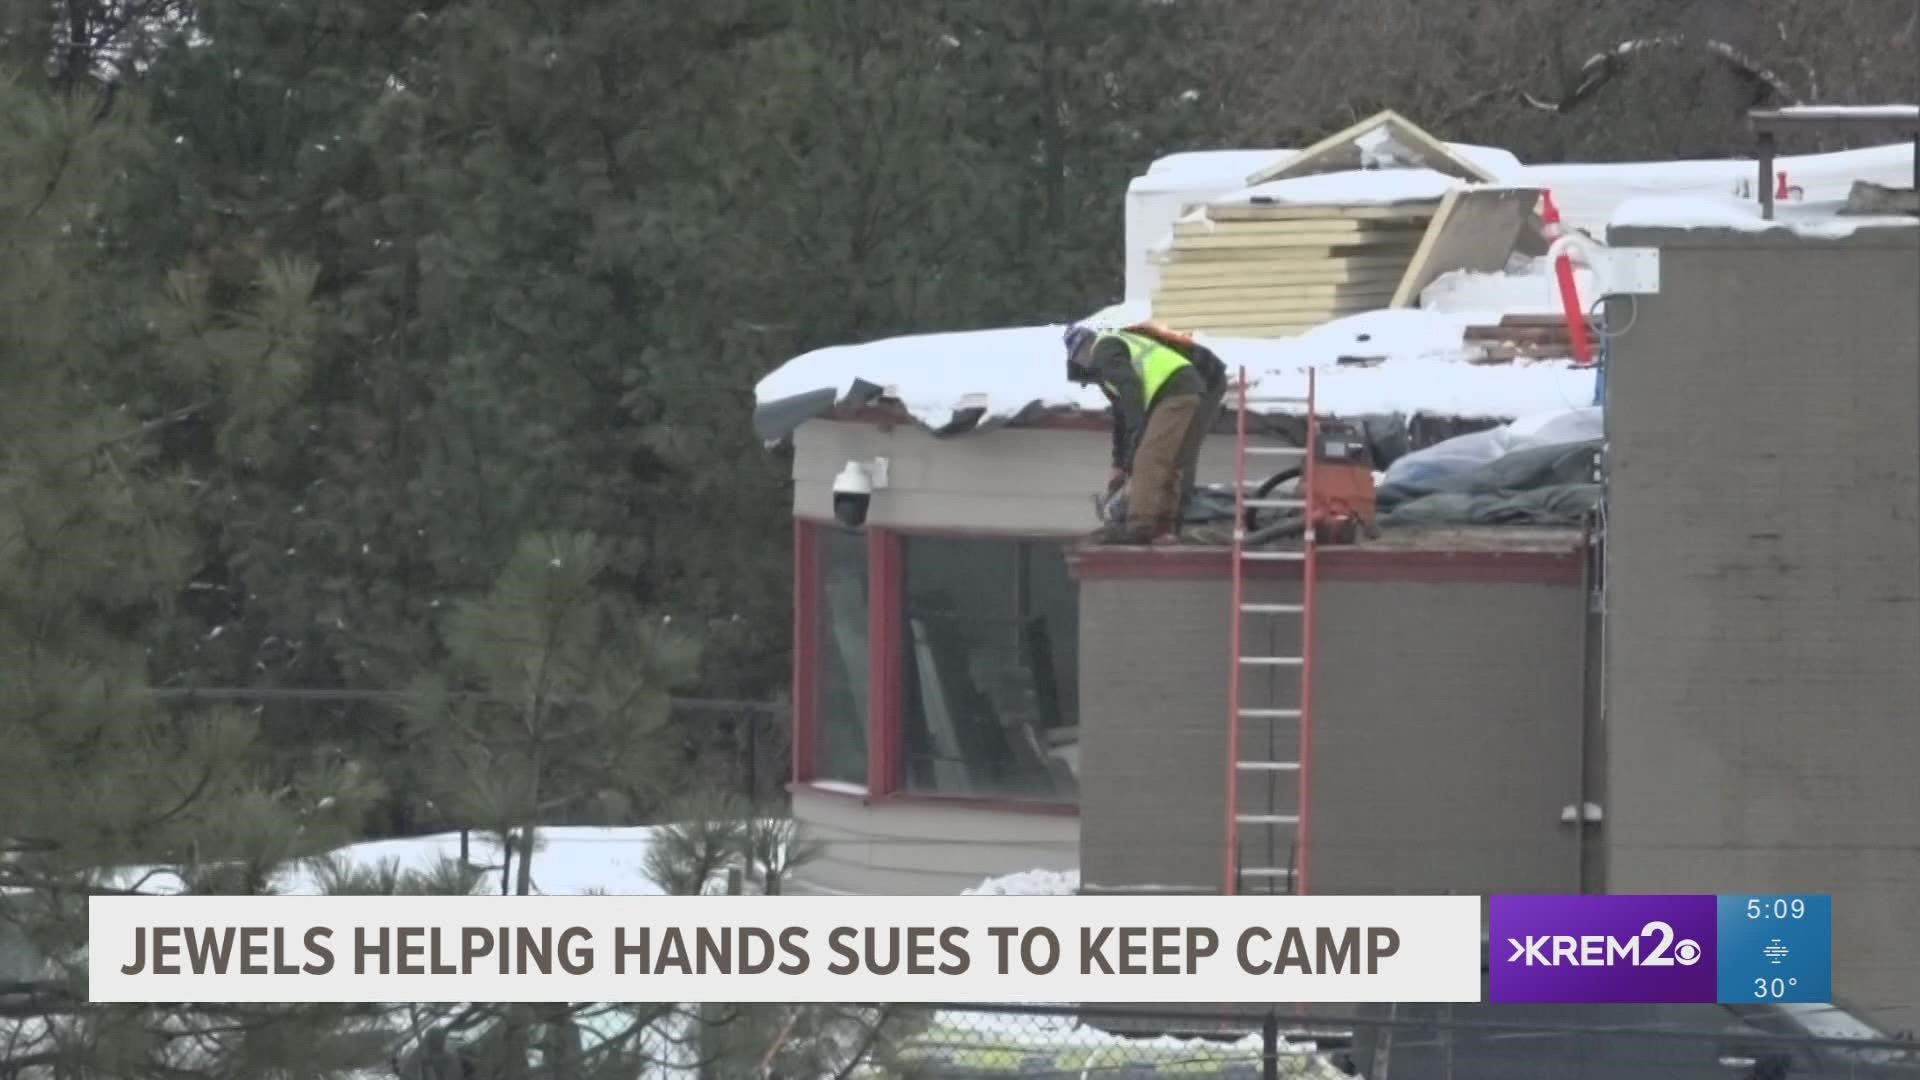 Jewels Helping Hands filed a lawsuit to keep law enforcement away from the I-90 homeless camp.